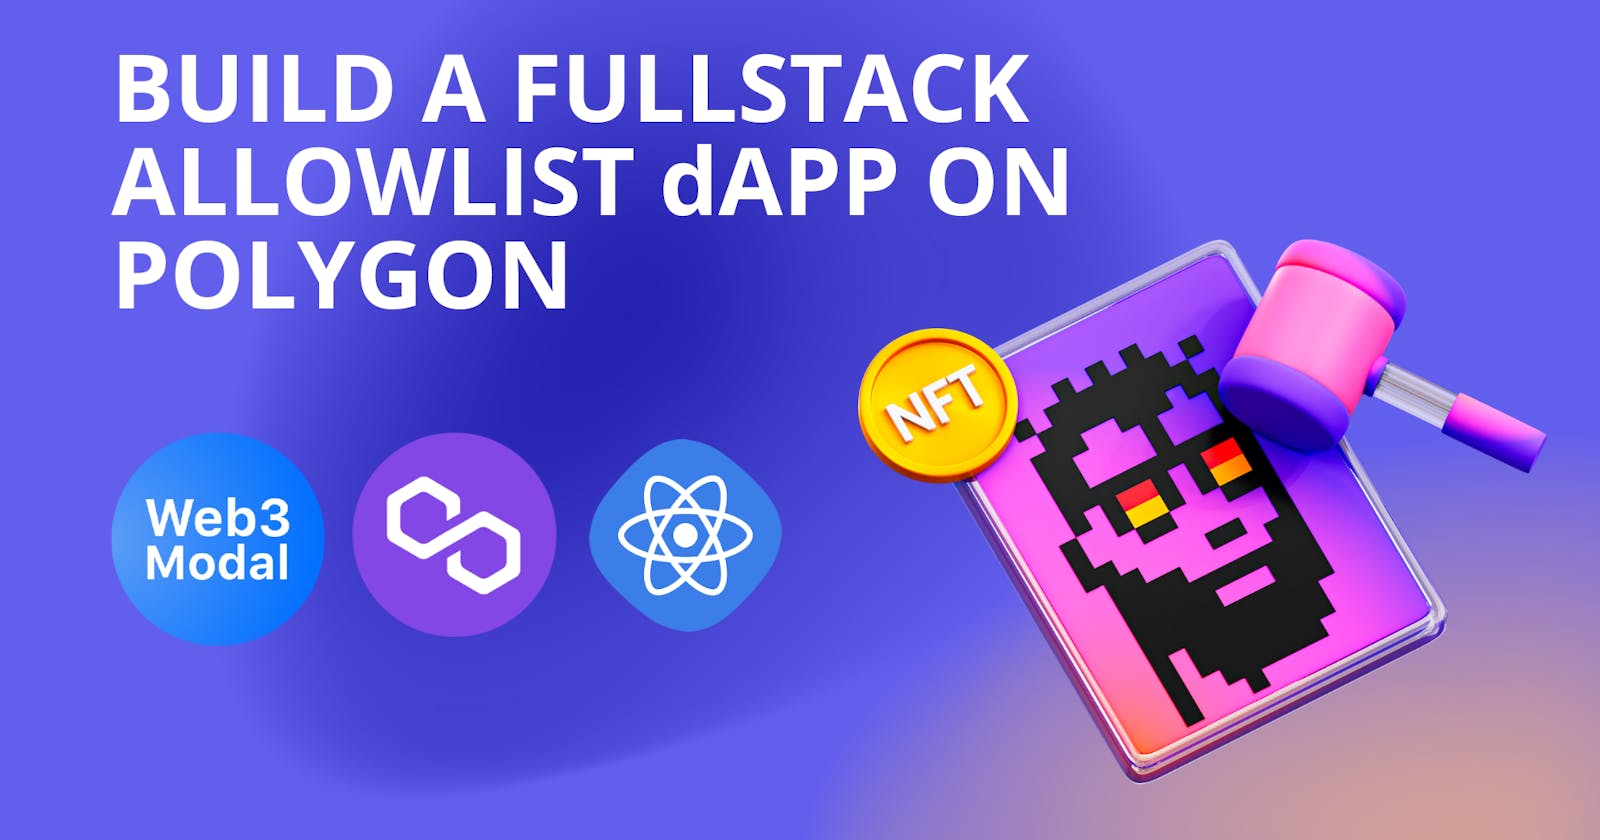 How to Build a Full Stack Allowlist dApp For Your NFT Collection on Polygon